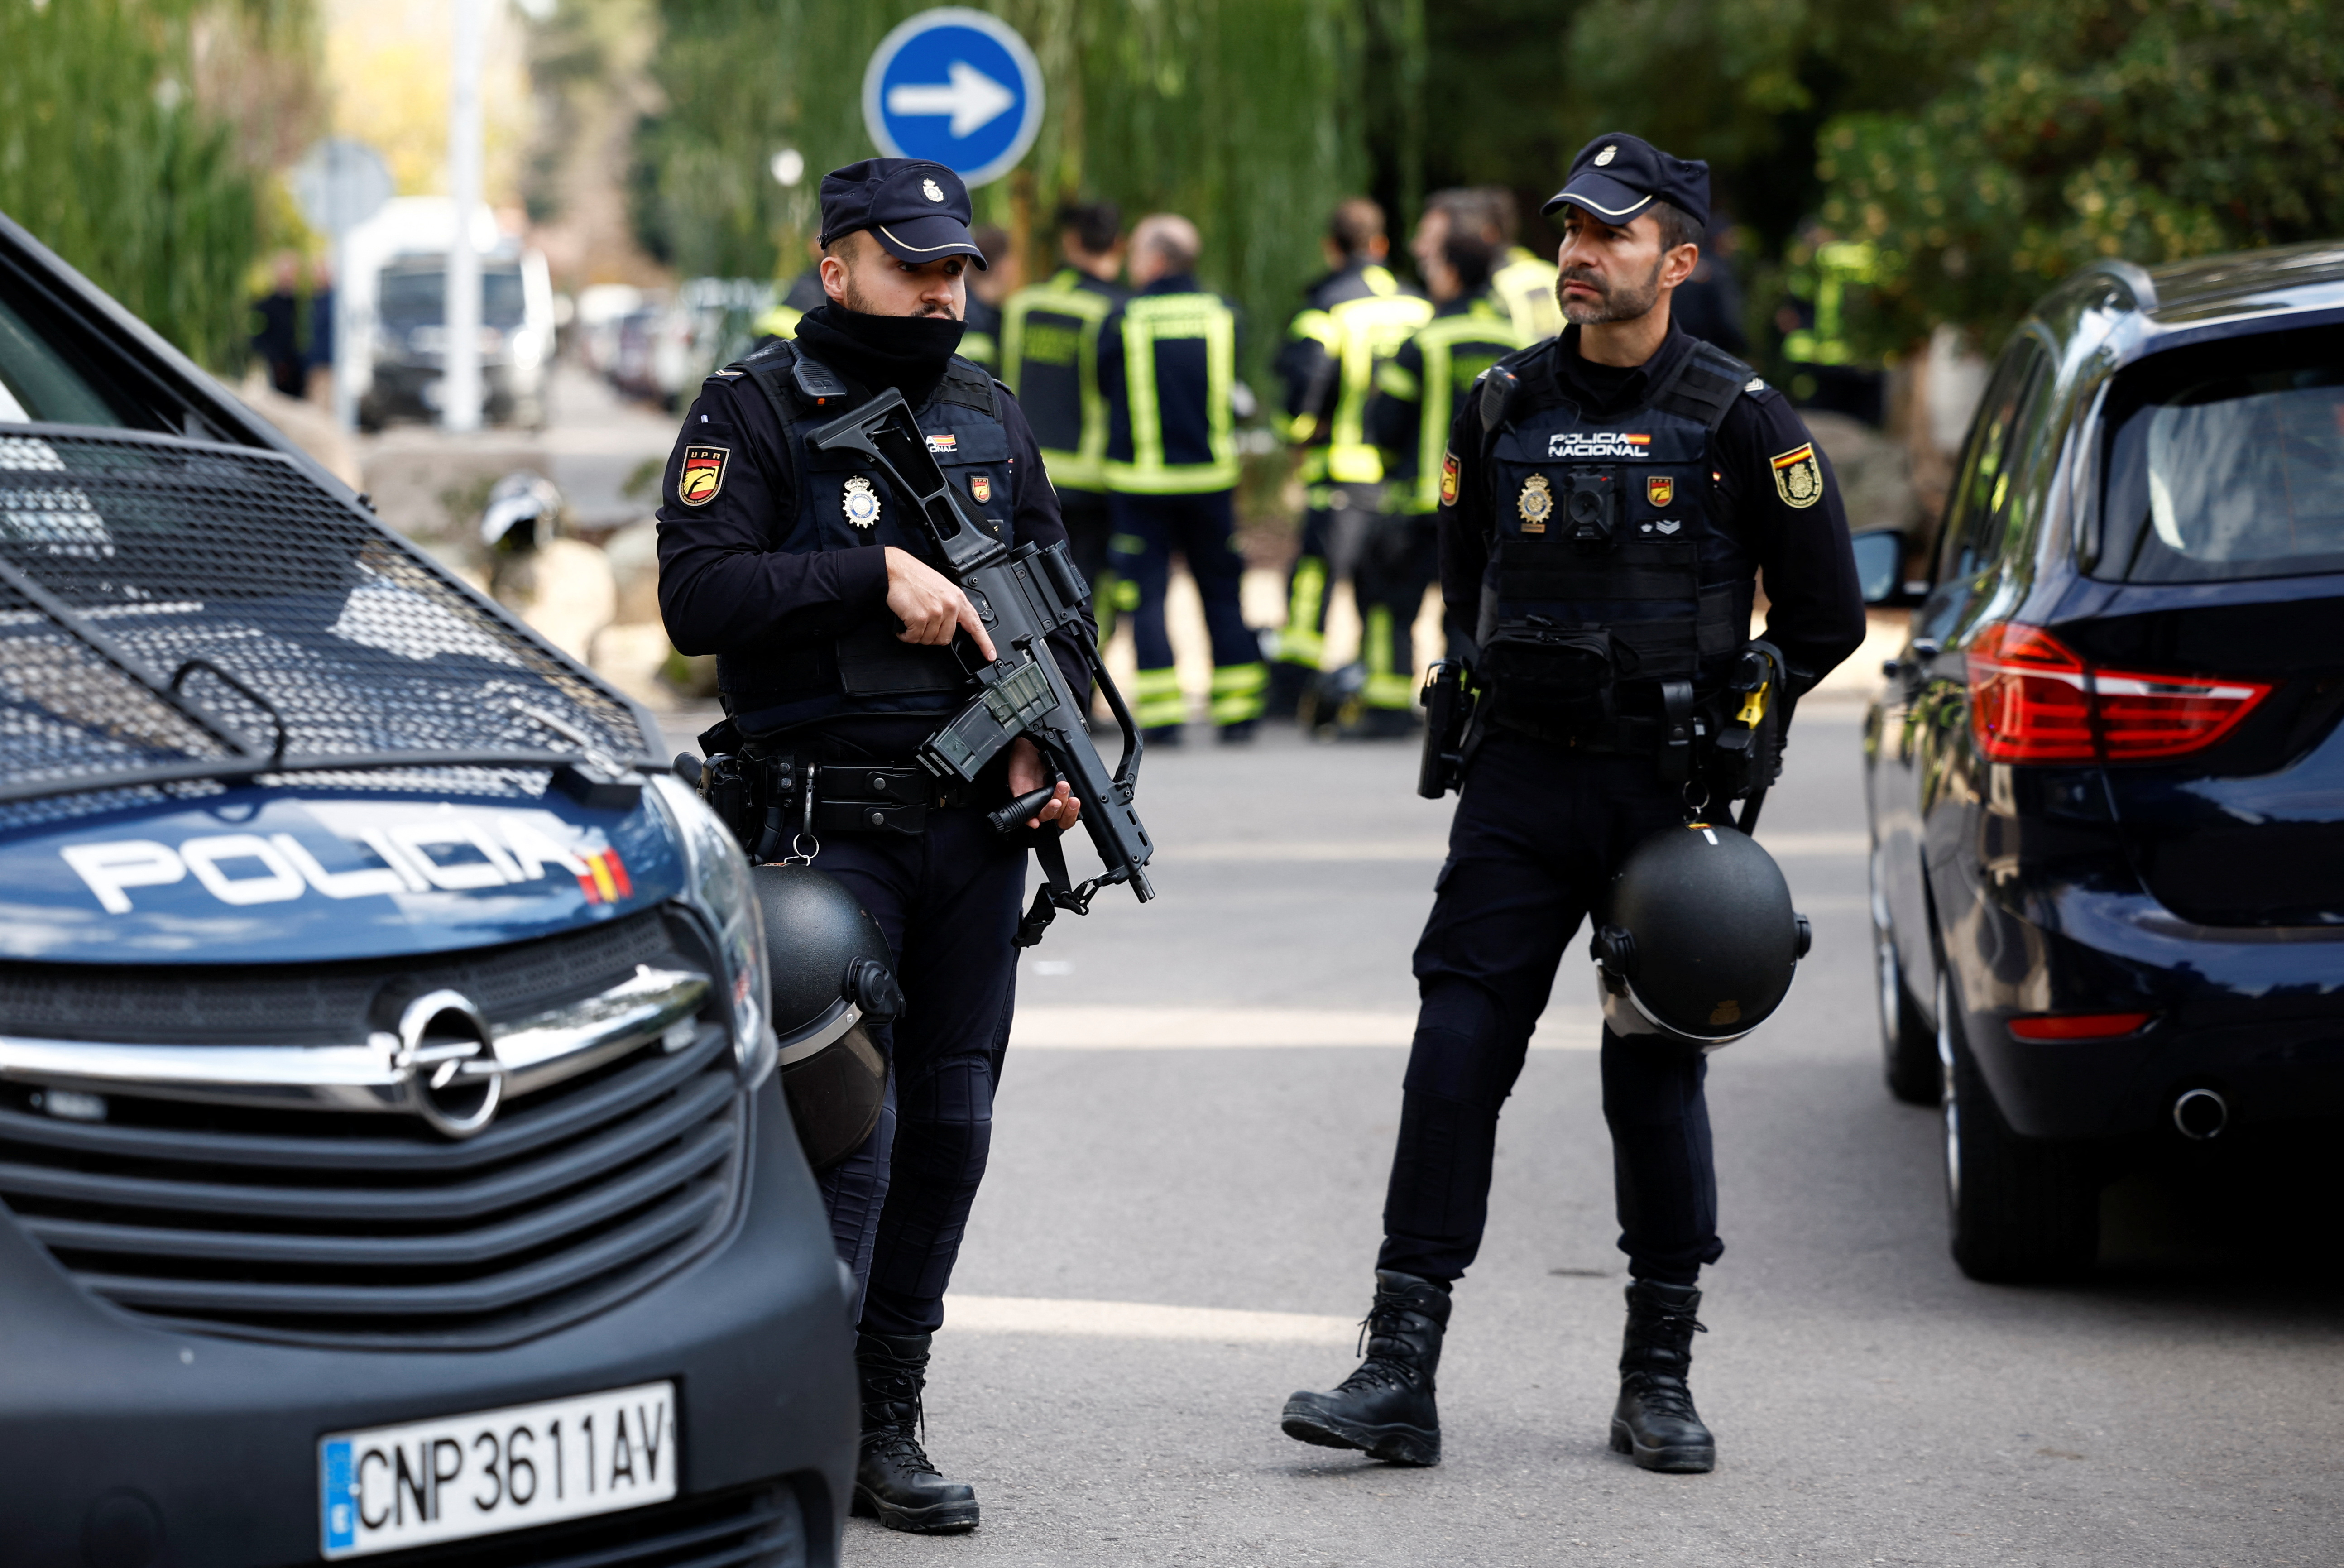 There was an explosion at the Ukrainian embassy in Madrid